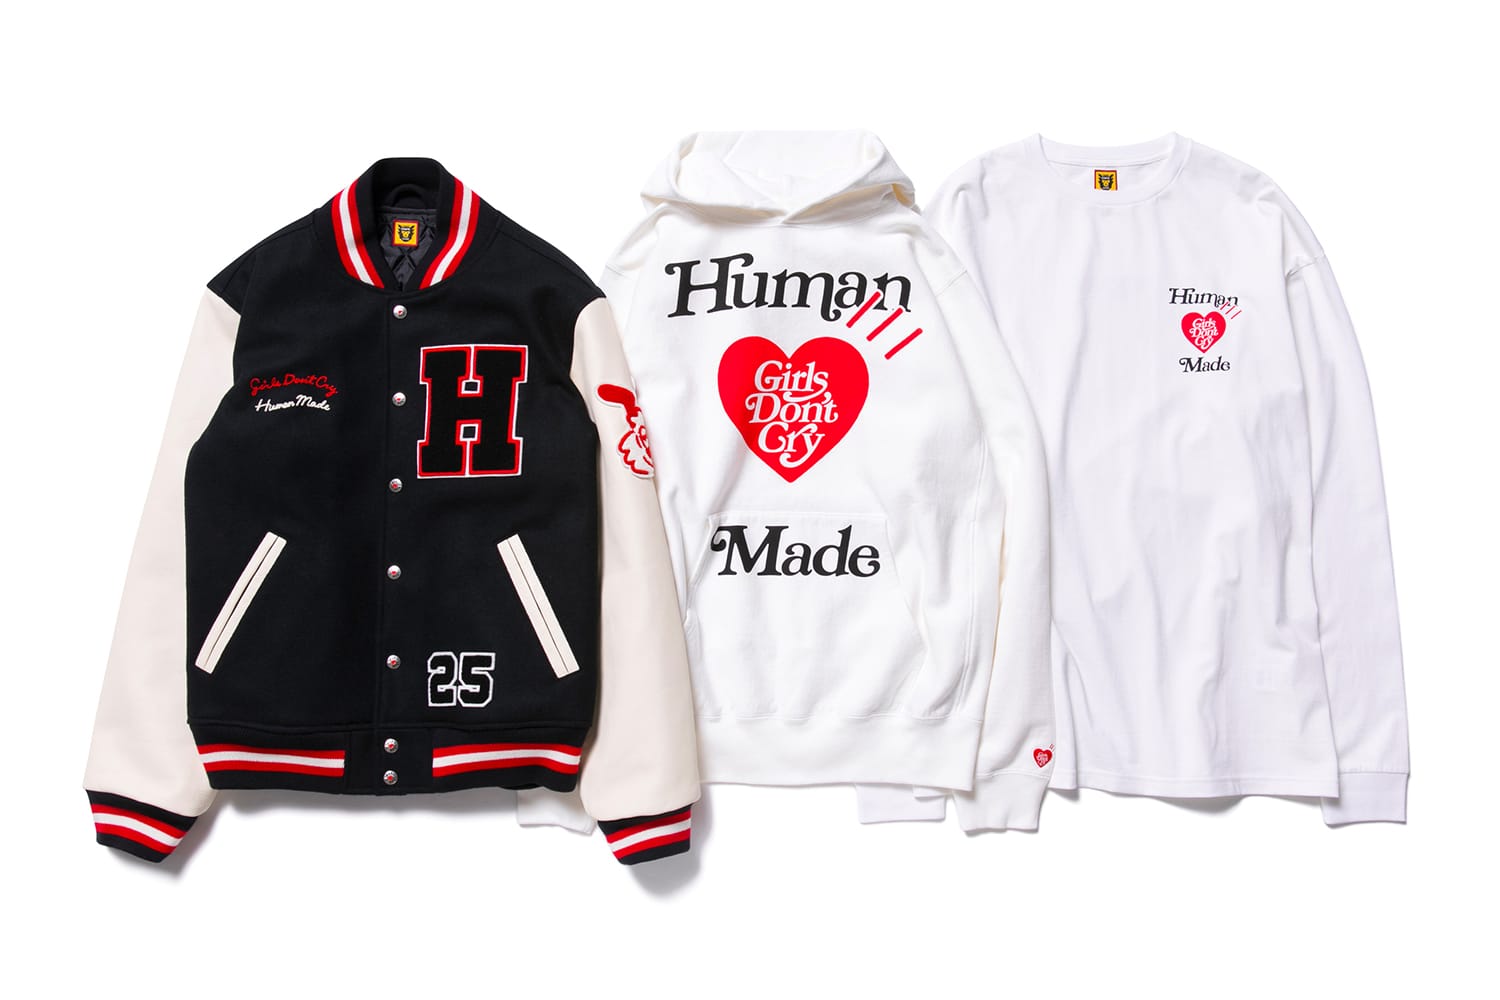 Girls Don't Cry x Human Made Verdy Harajuku Day Capsule | HYPEBEAST